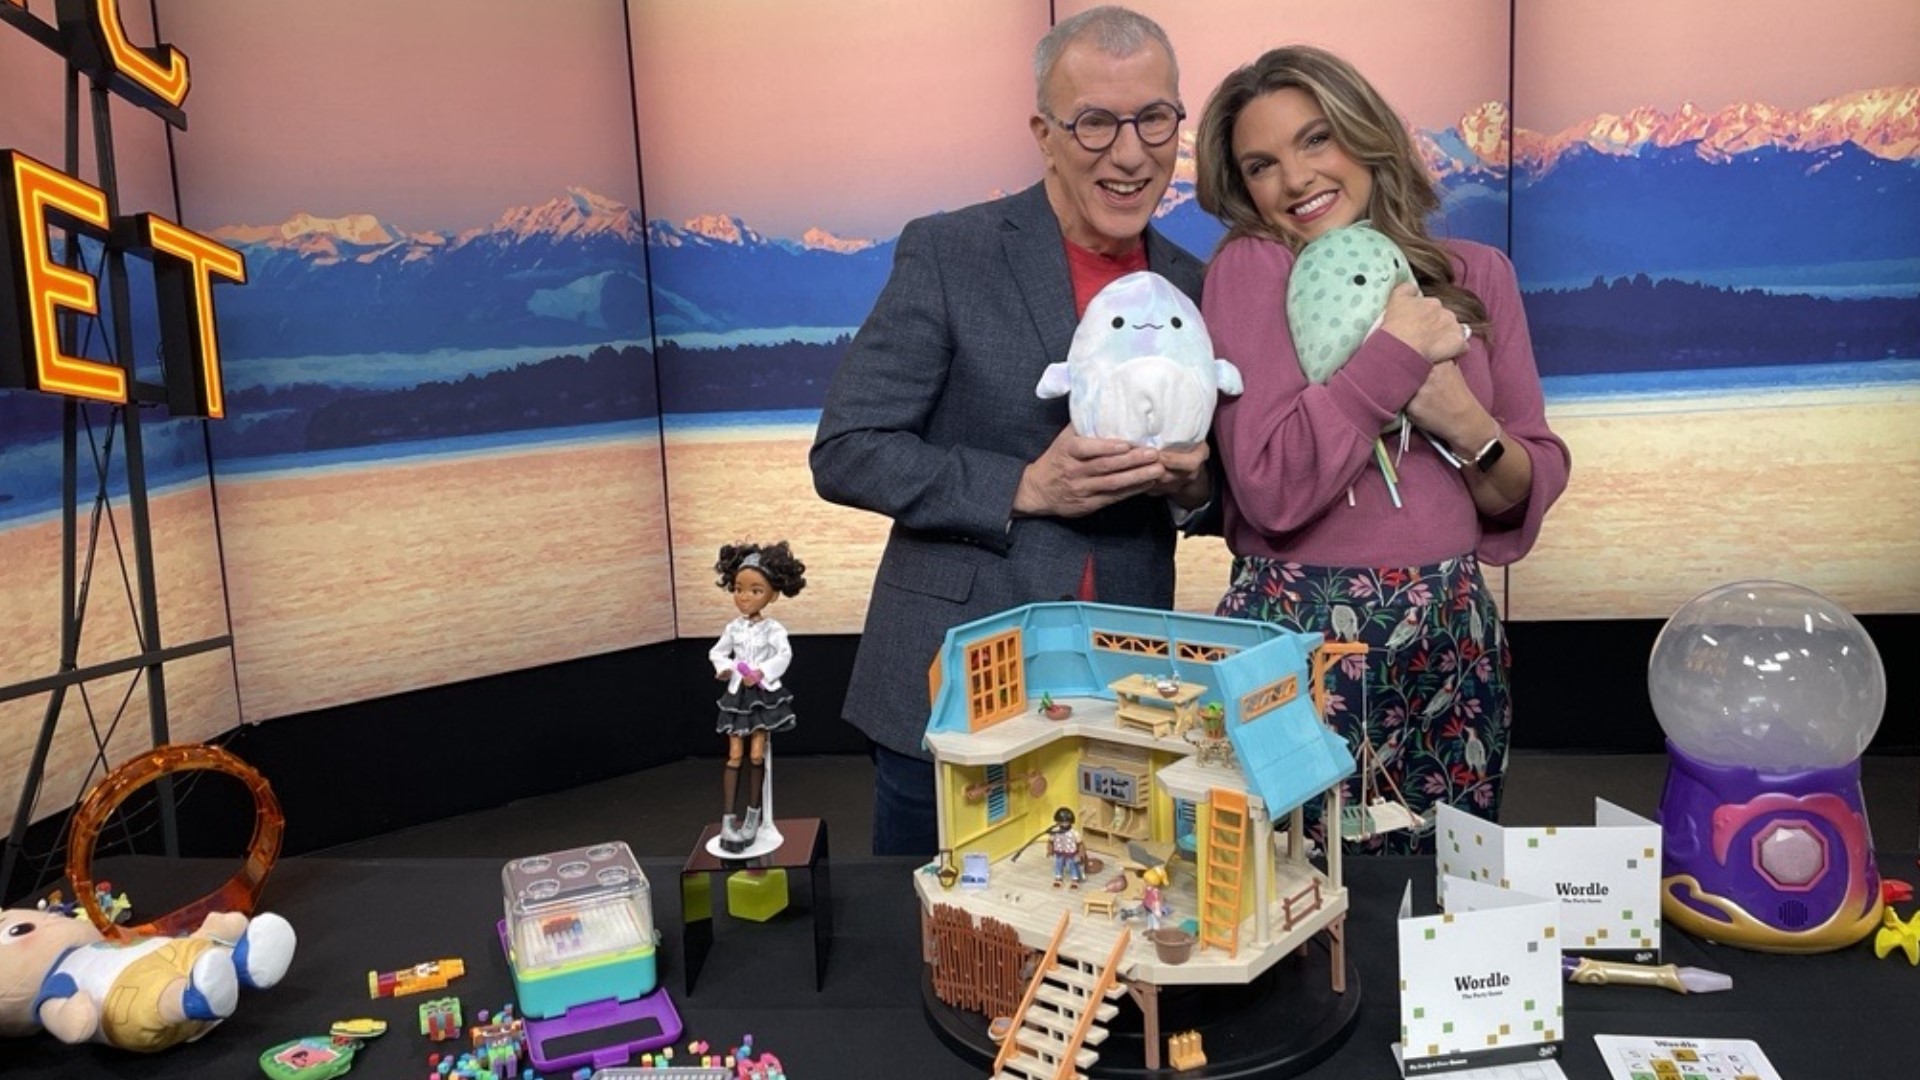 The Toy Guy Chris Byrne shares his top 9 picks, including the hard to find Pixobitz Studio and more. Get them early! #newdaynw